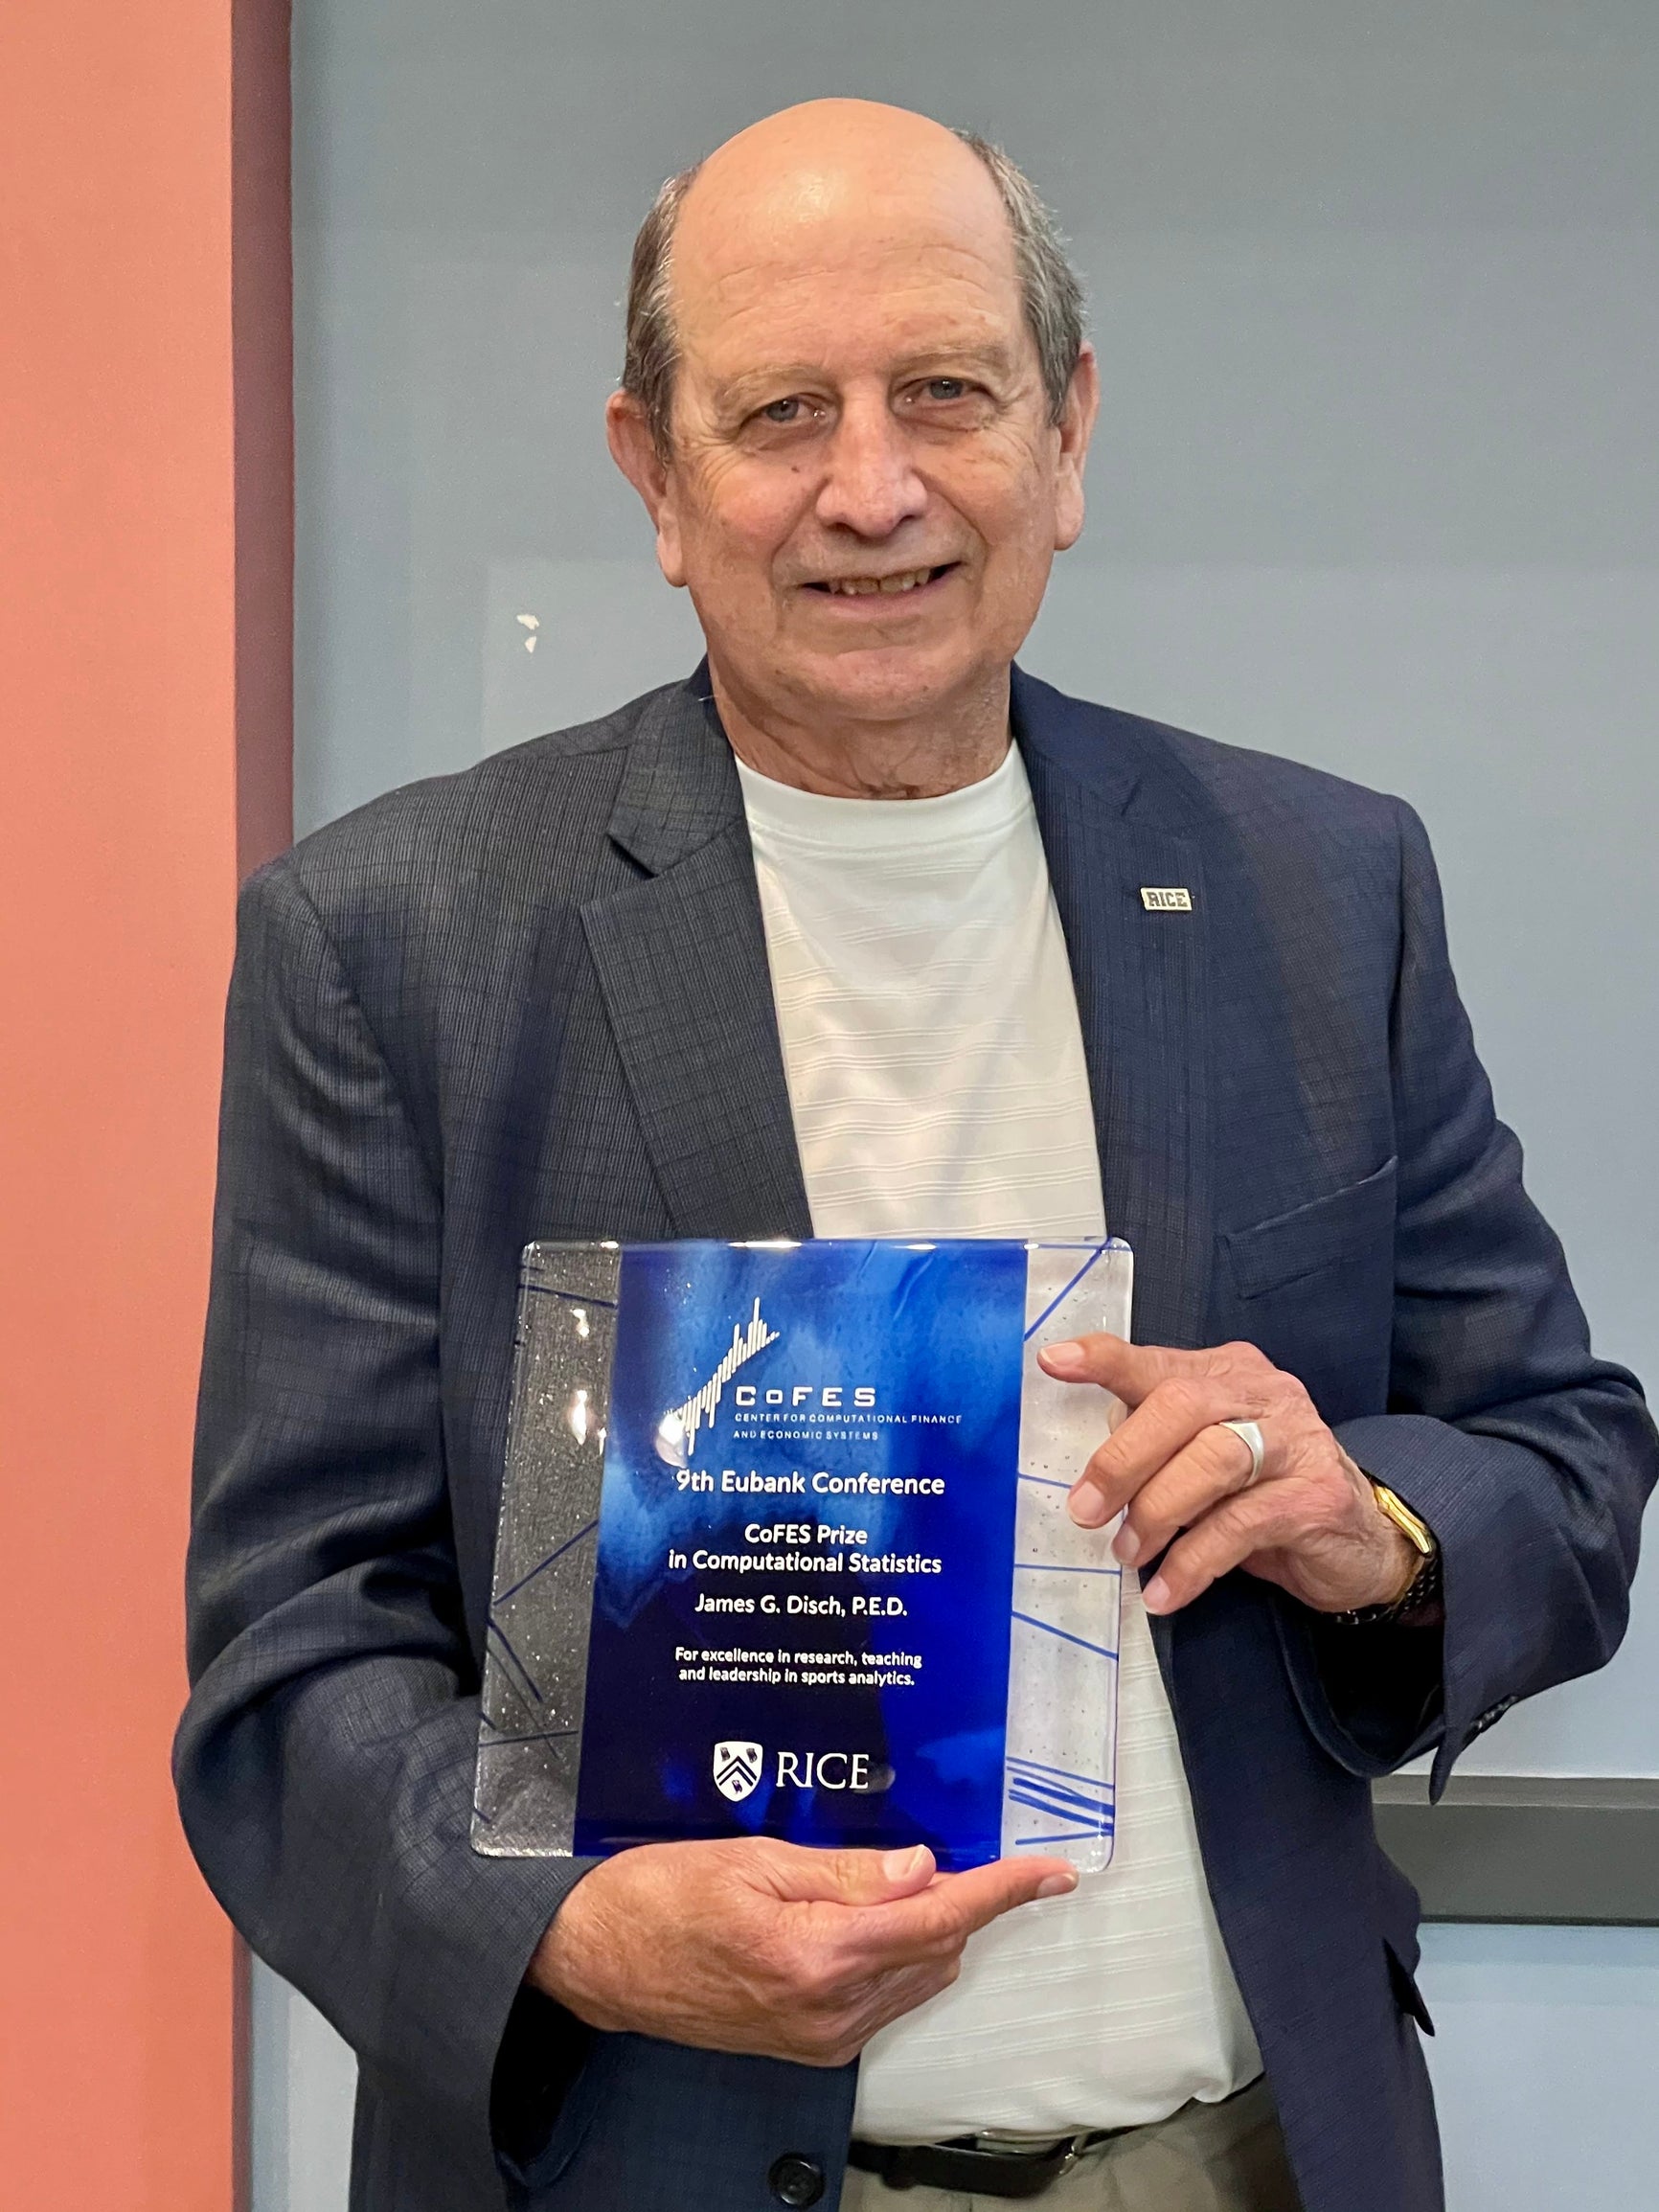 Dr. Disch receives 2021 CoFES Prize in Computational Statistics 